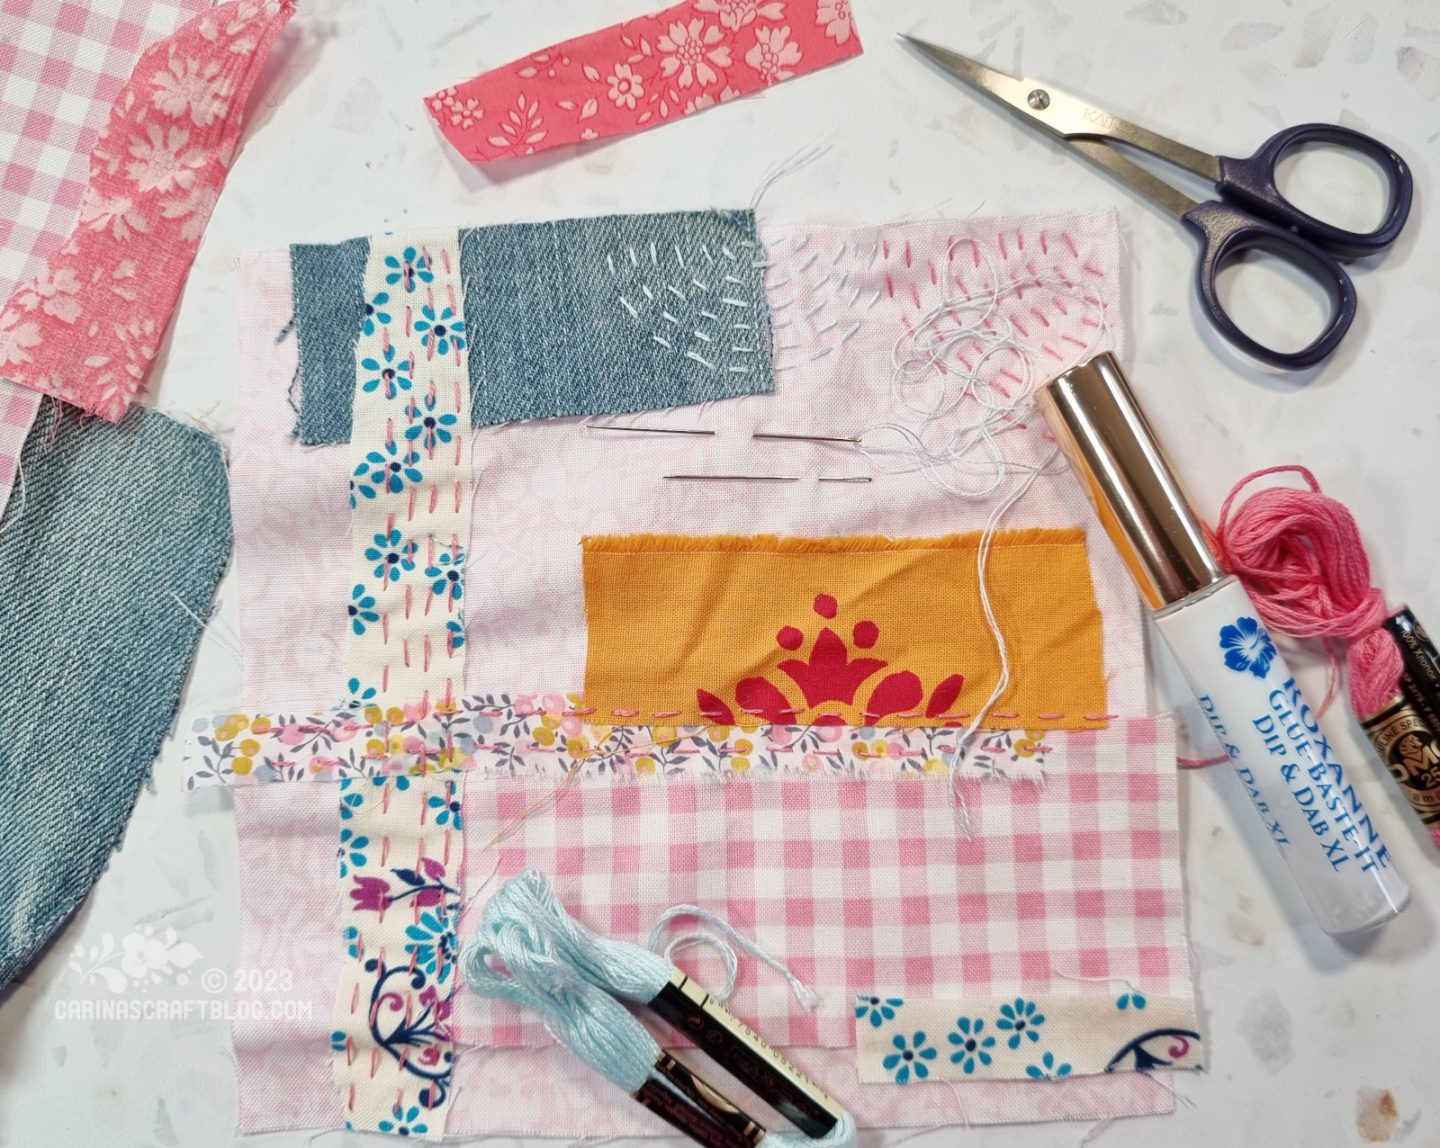 A pale pink square of fabric has been partially covered in various fabric scraps and running stitches. The square is surrounded by various threads and a pair of embroidery scissors.